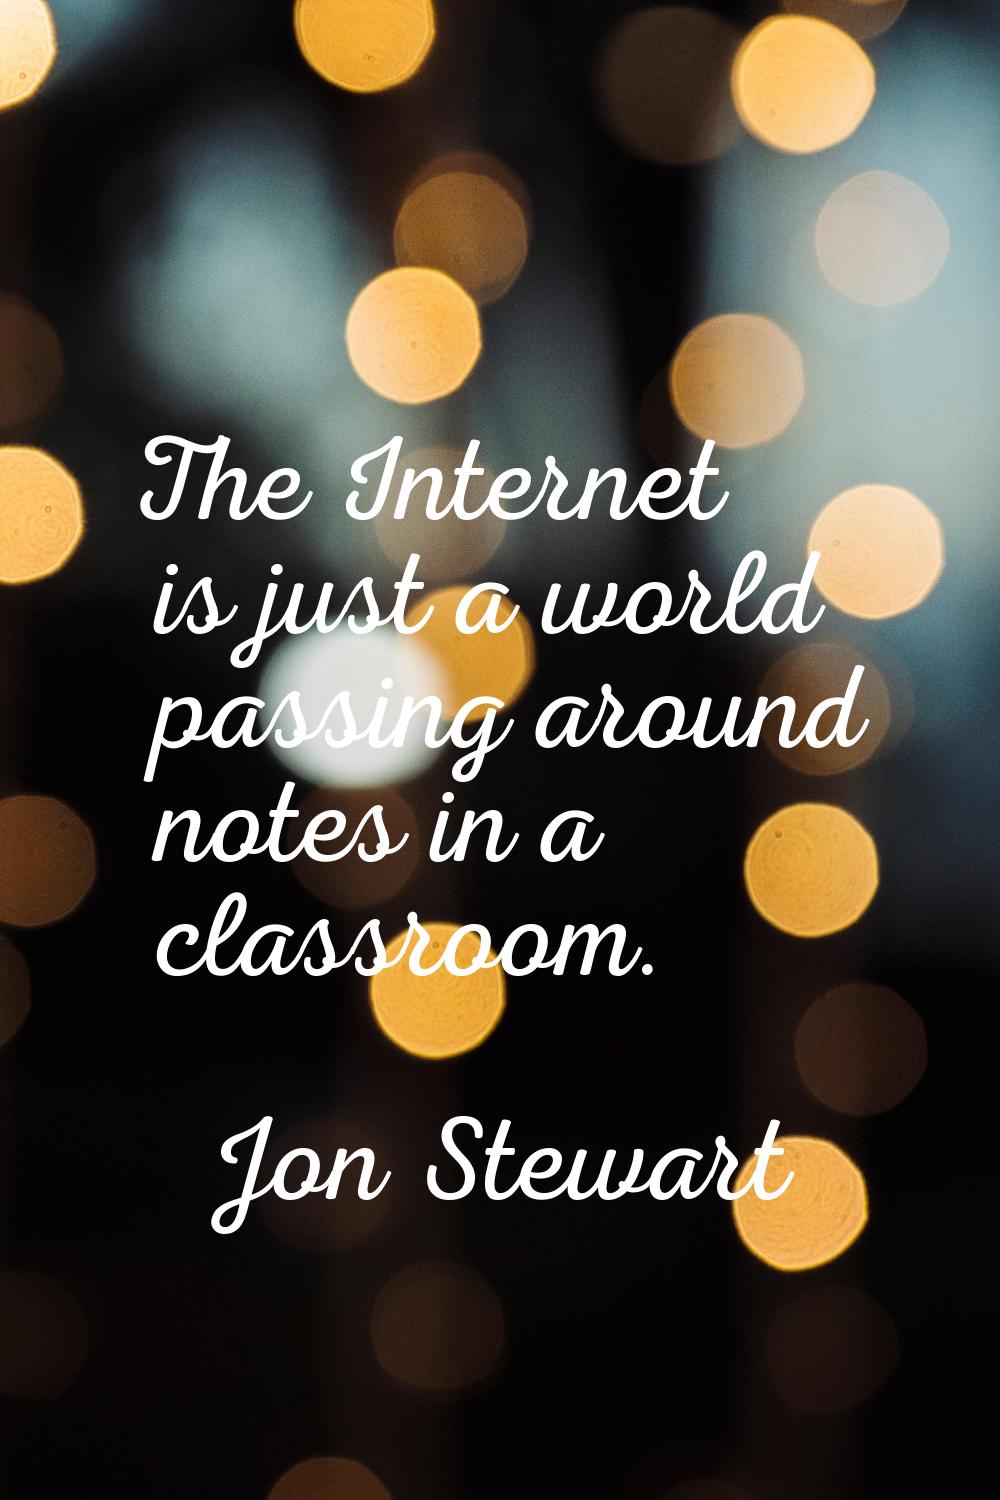 The Internet is just a world passing around notes in a classroom.